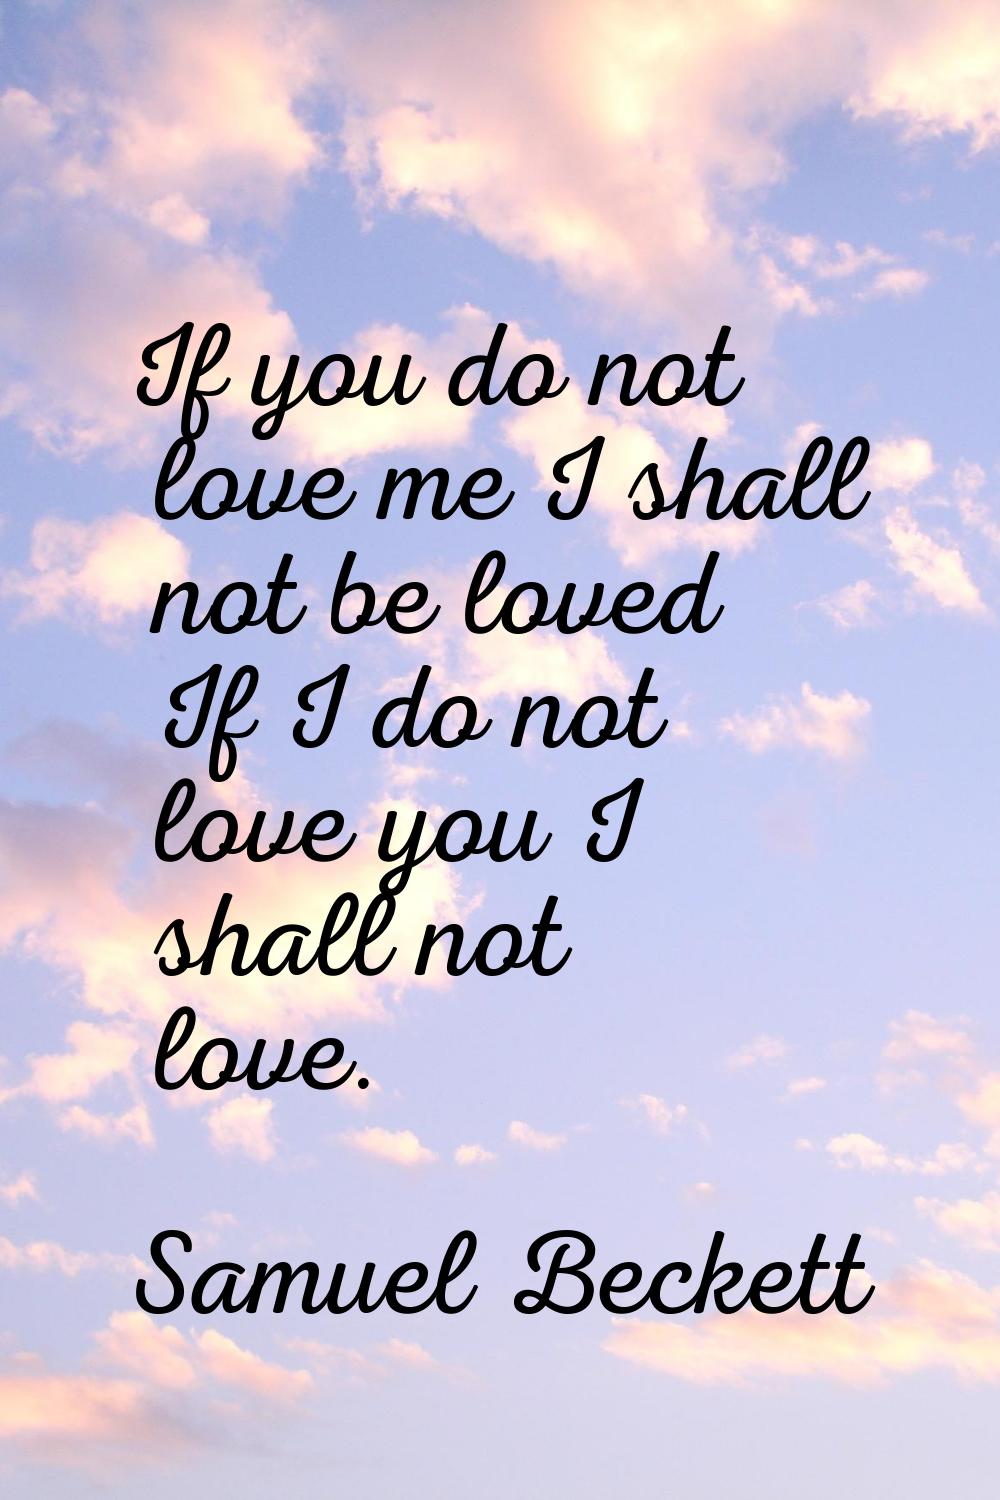 If you do not love me I shall not be loved If I do not love you I shall not love.